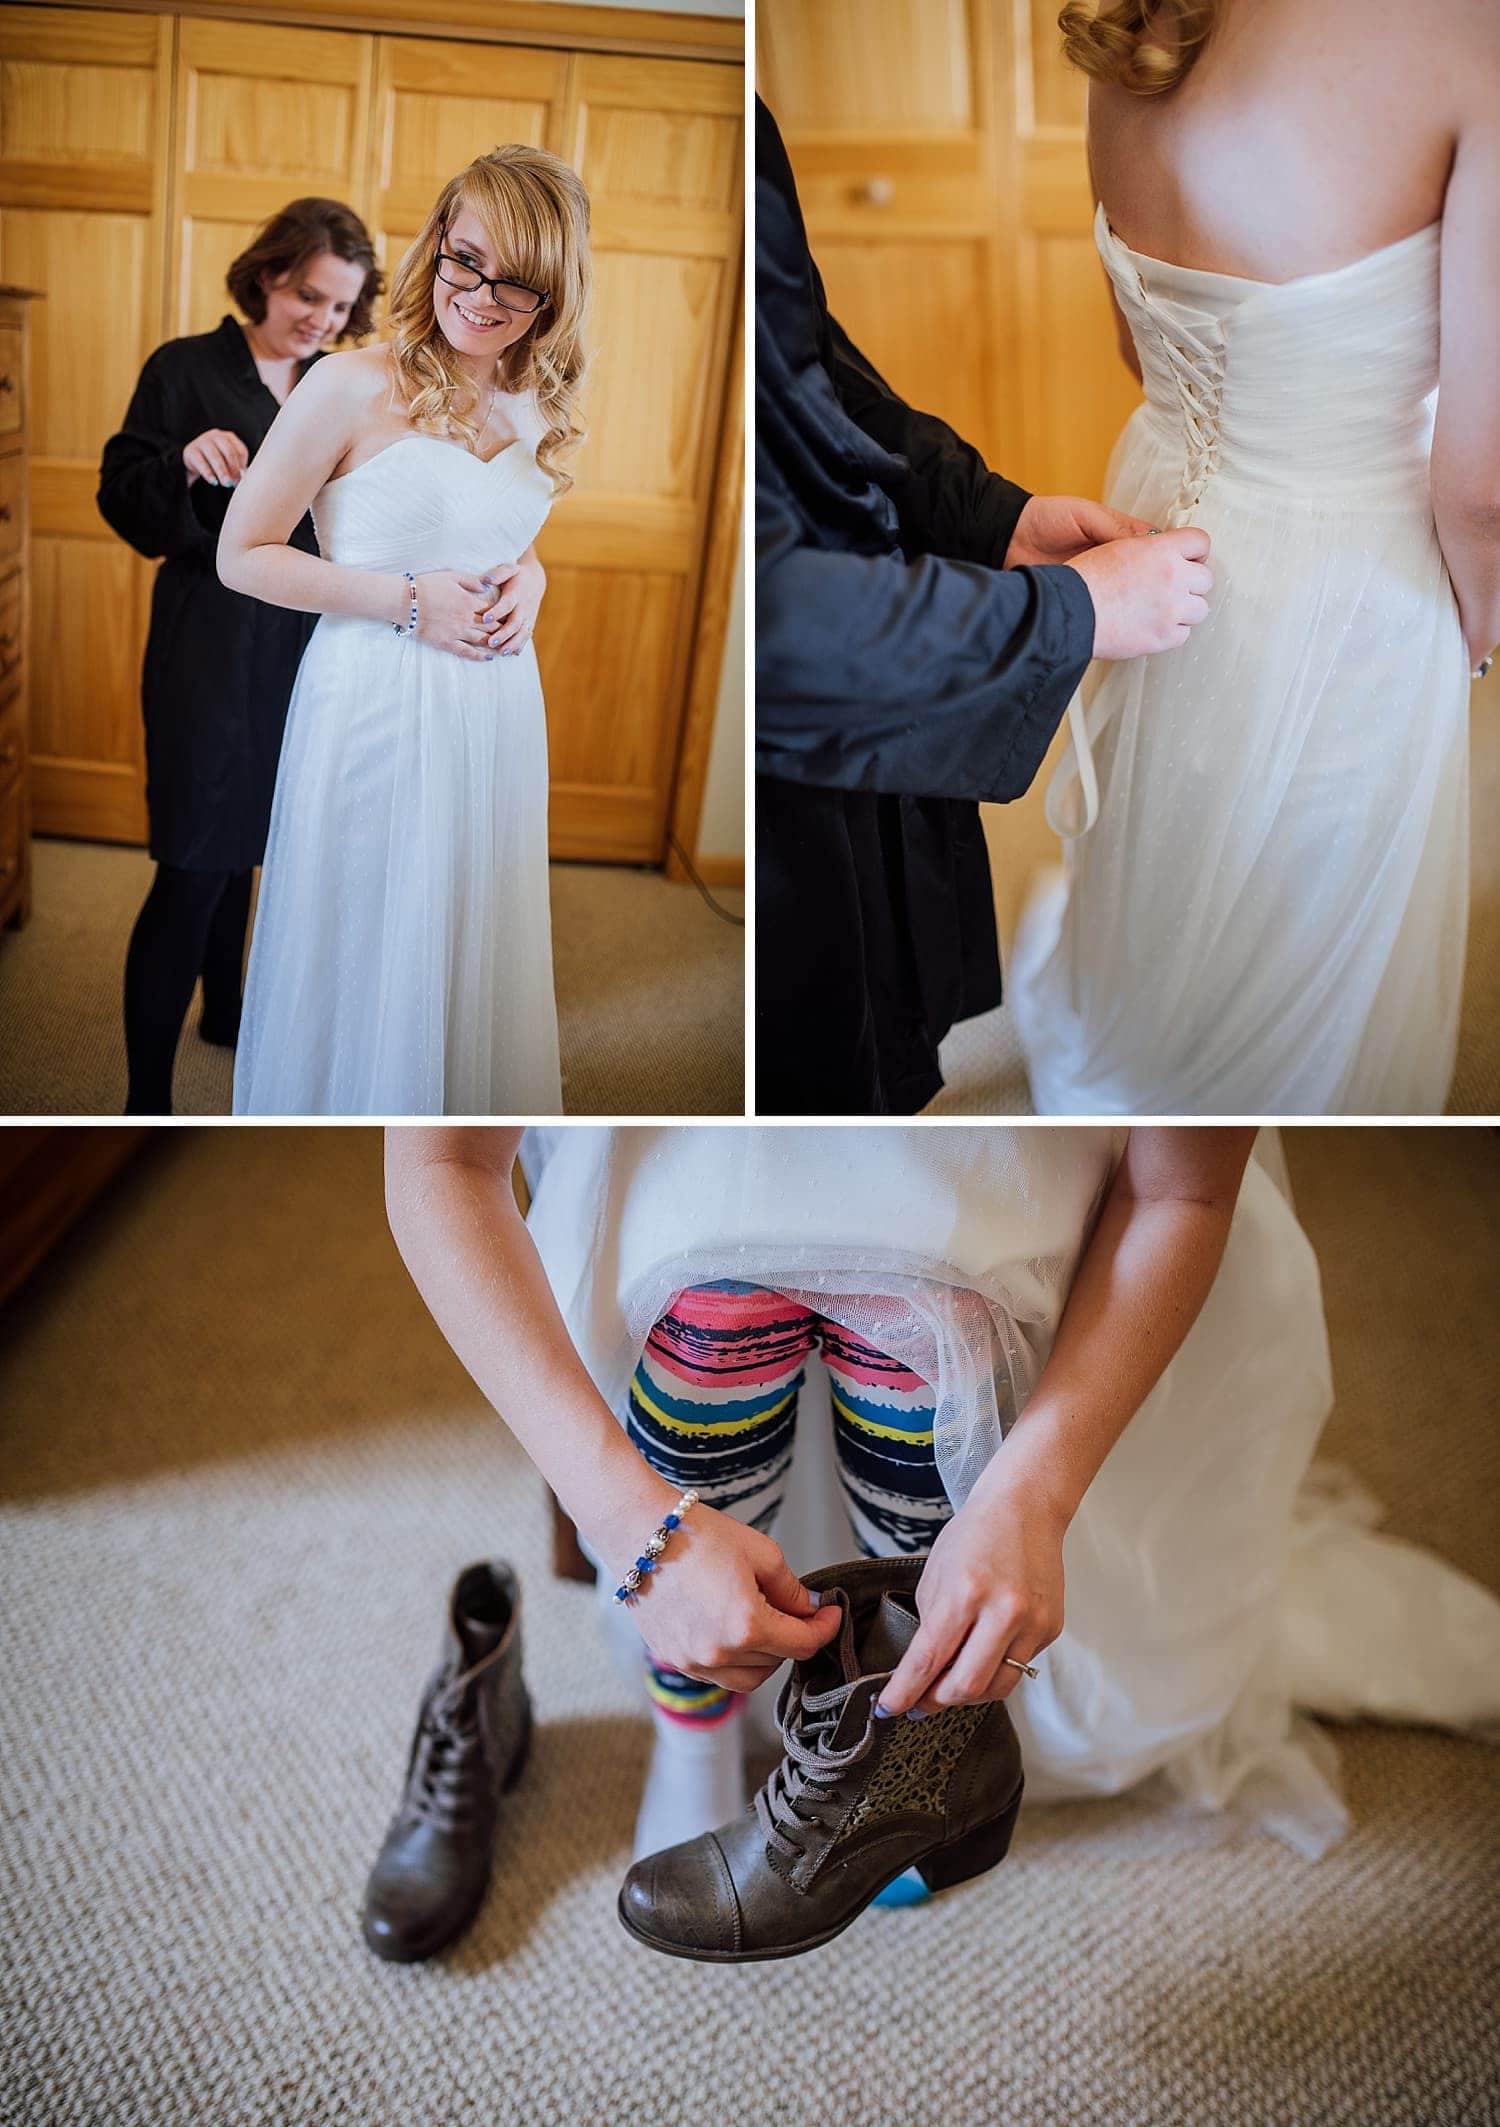 Friend helps bride synch her dress while getting ready at the Stanley Hotel in Estes Park, Colorado.  